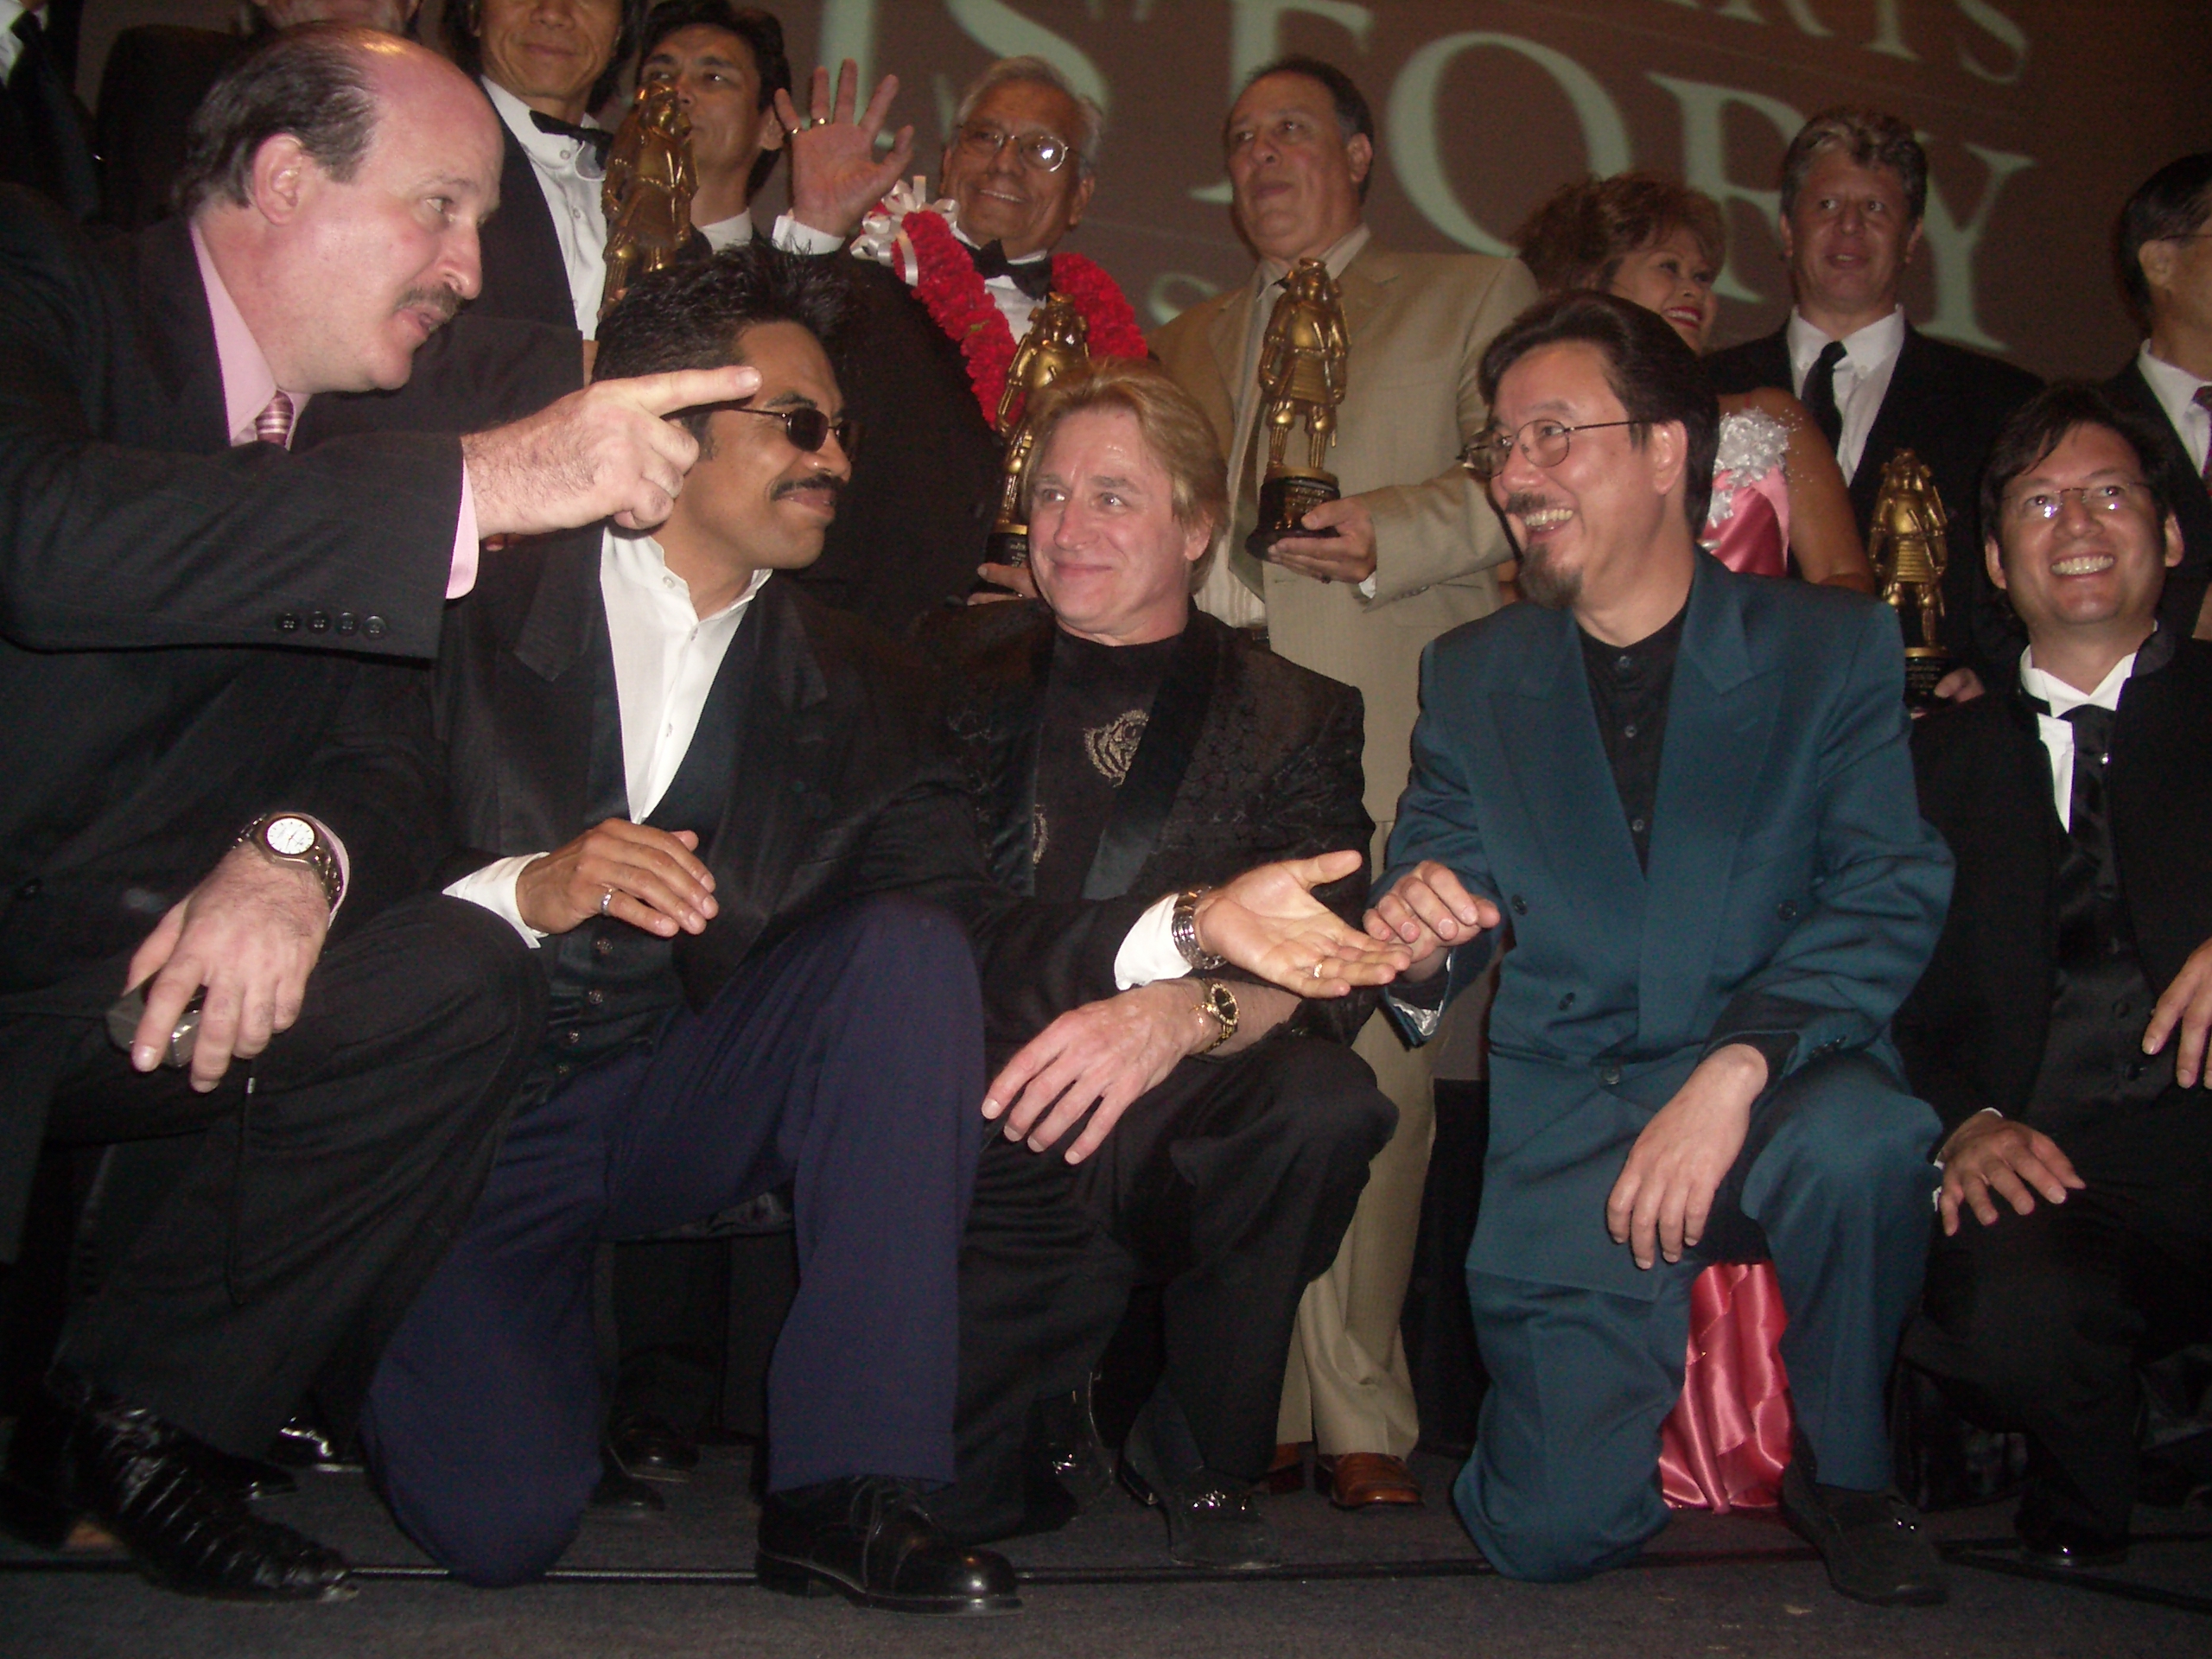 Art Camacho, John Corcoran, Alan Goldberg and Robert Lee (Bruce Lee's brother) being honored at Martial Arts History museum ceremony by Museum founder Michael Matsuda